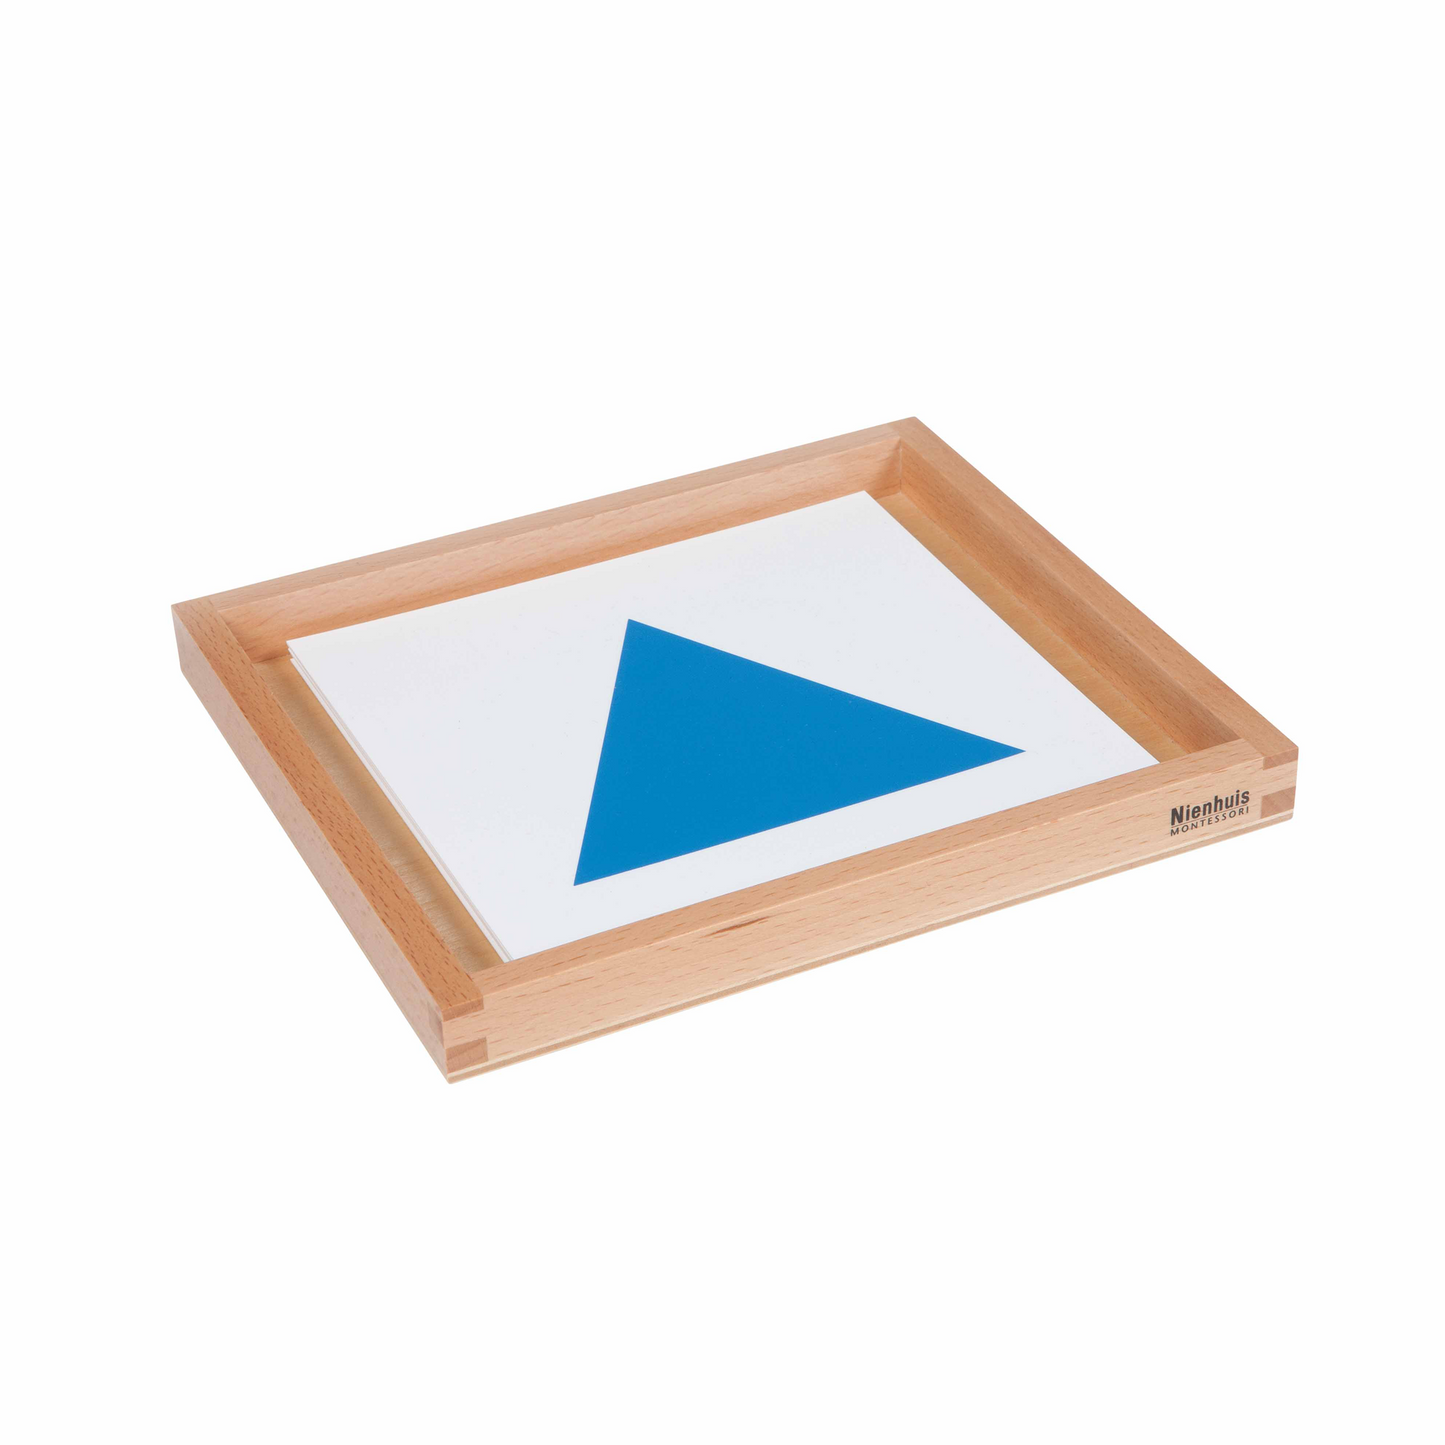 Cards of geometric shapes and tray - Nienhuis AMI